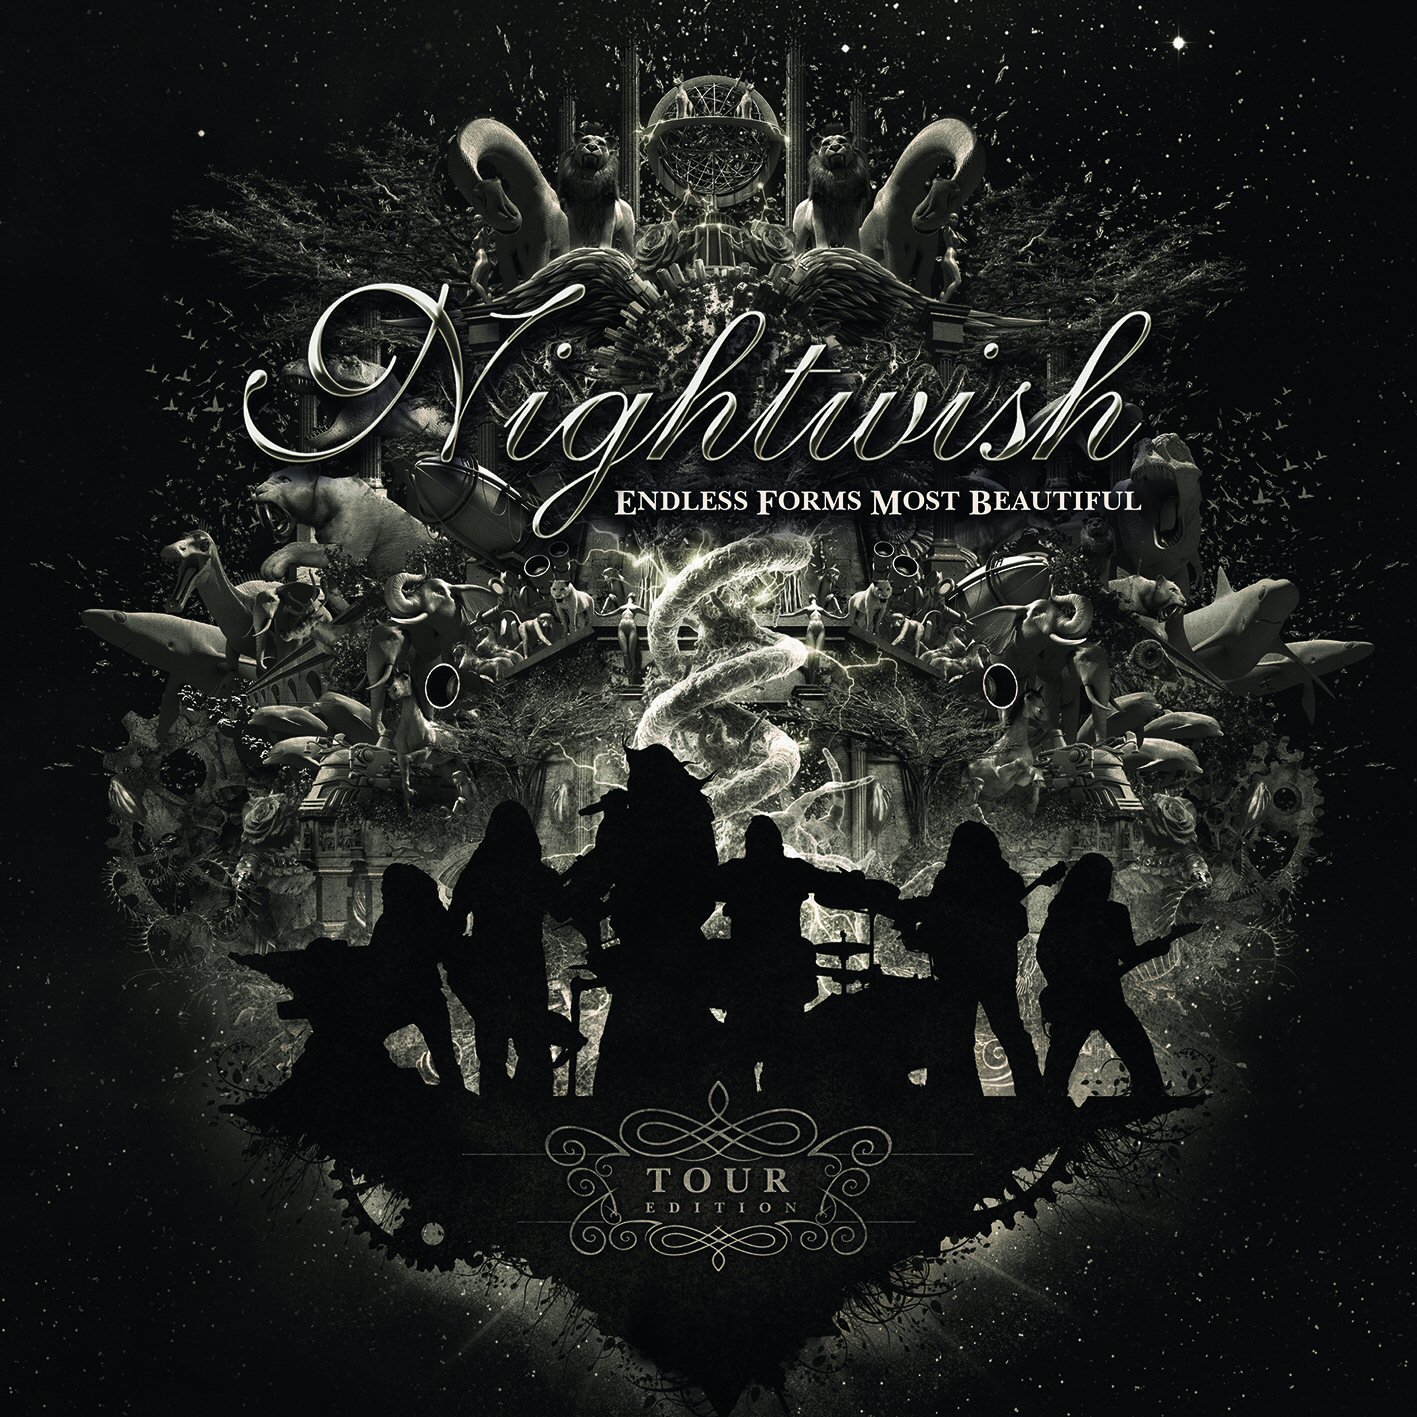 Endless Forms Most Beautiful - Tour Edition CD + DVD | Nightwish